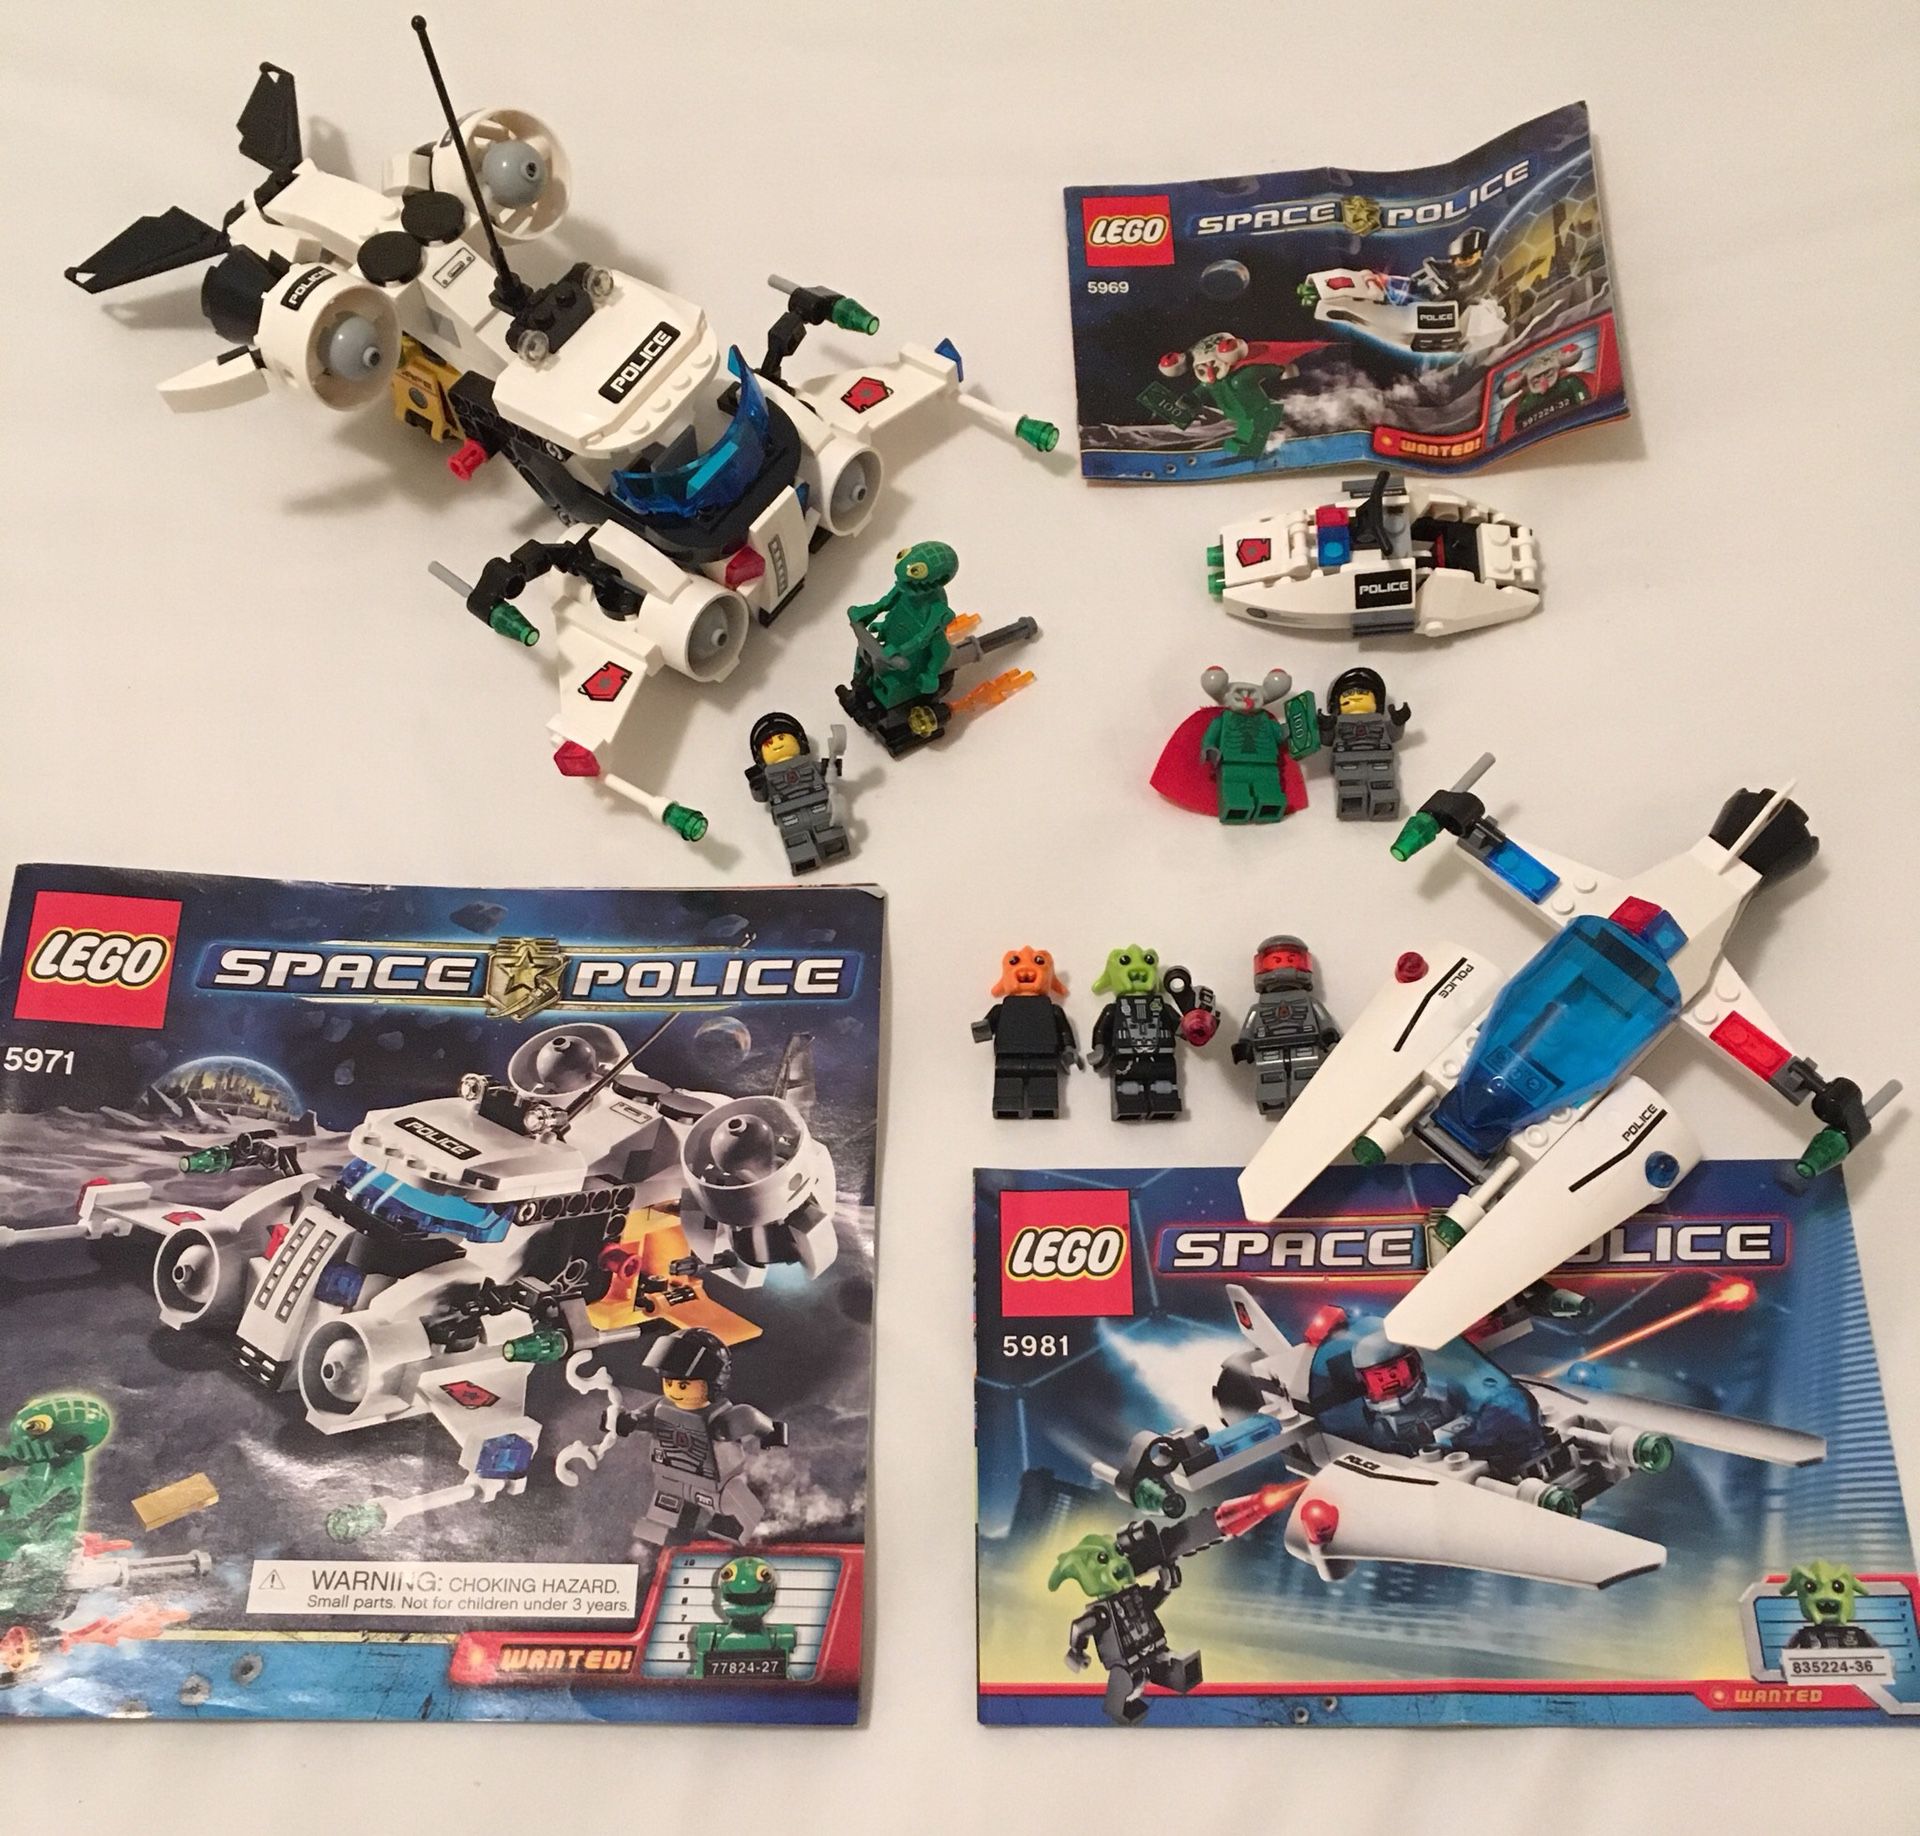 LEGO Space Police sets for in Fresno, OfferUp